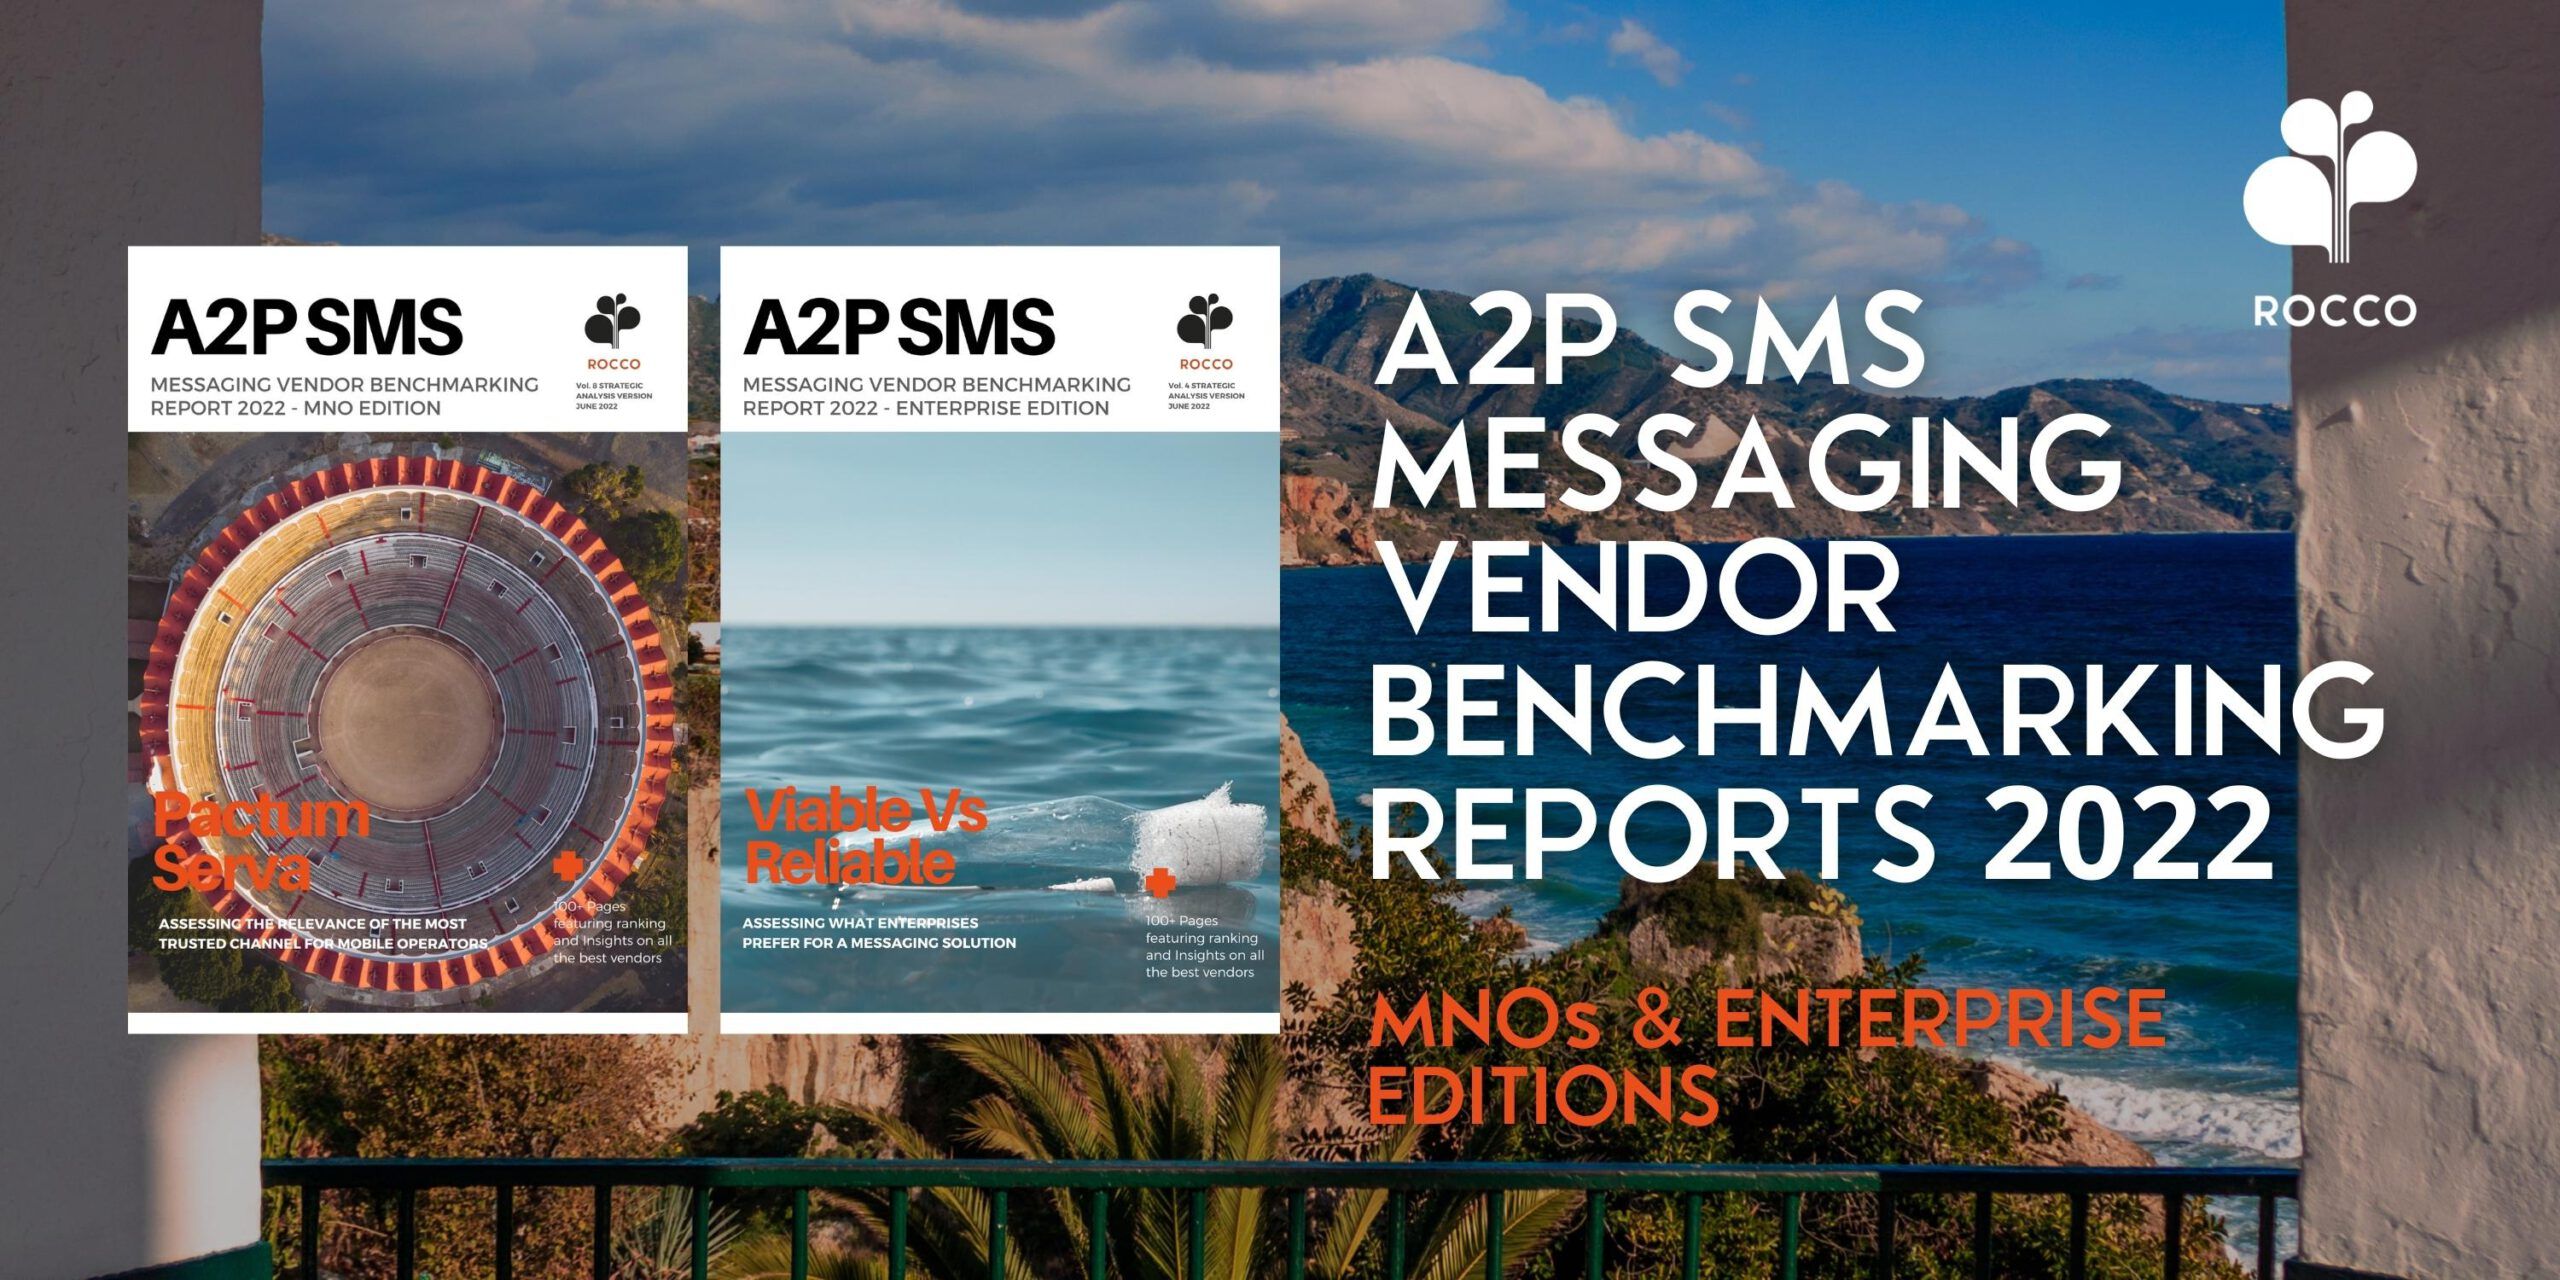 ROCCO Publishes two new reports on A2P SMS